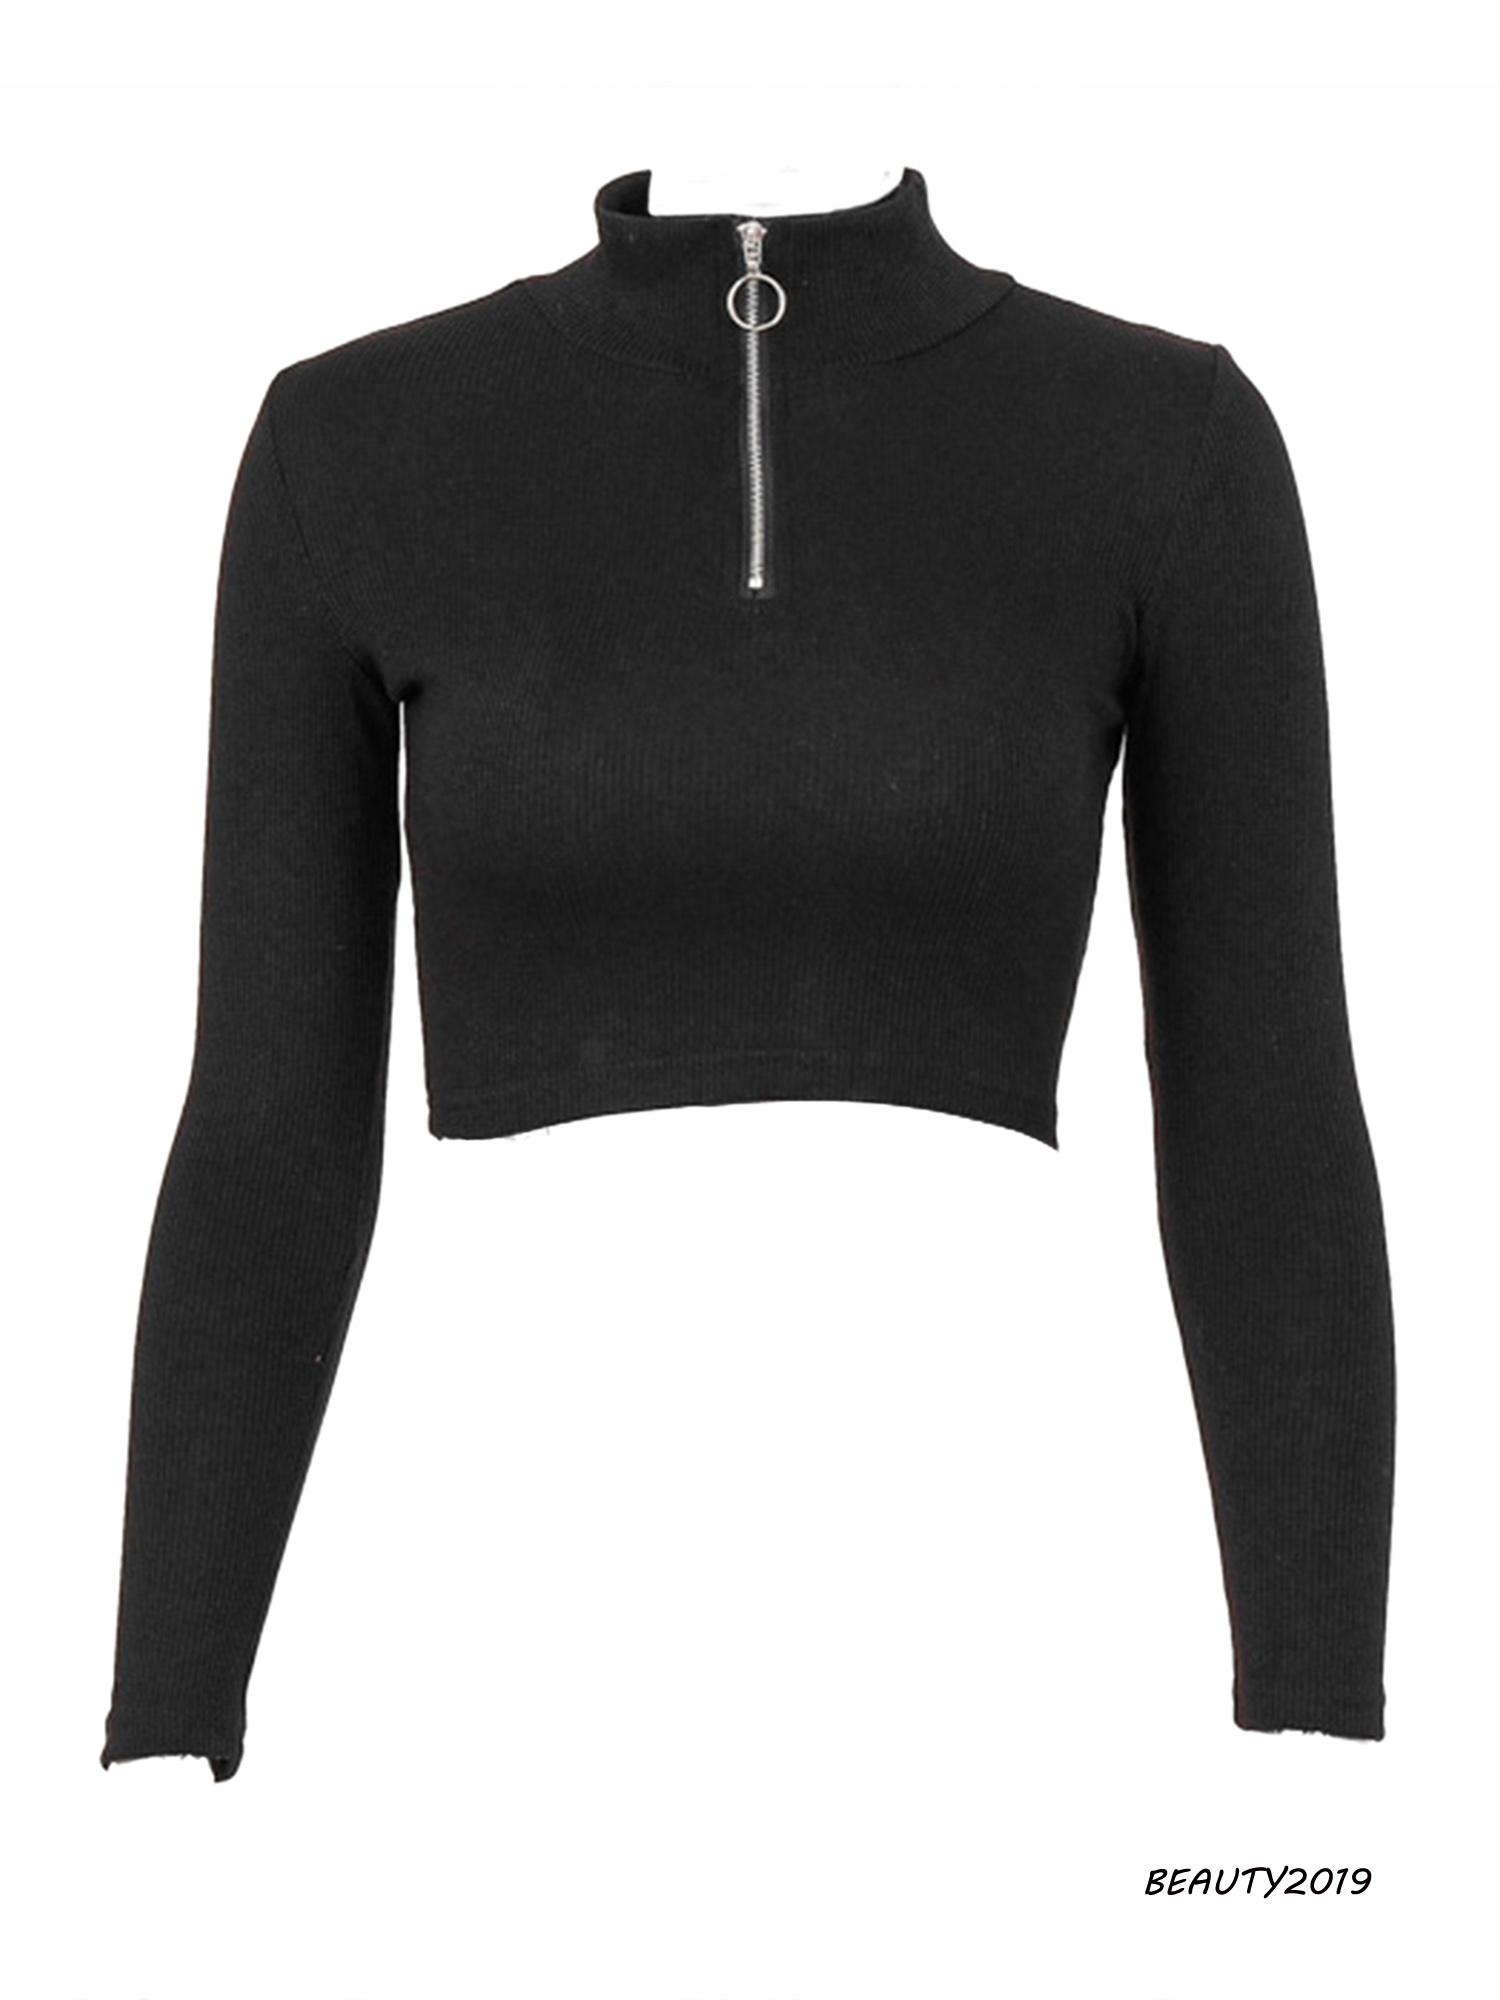 ➹-Women´s Rib Knit Crop Top Long Sleeve Stand Collar Zipper Front Slim Fit Solid Color Basic Tee Shirt